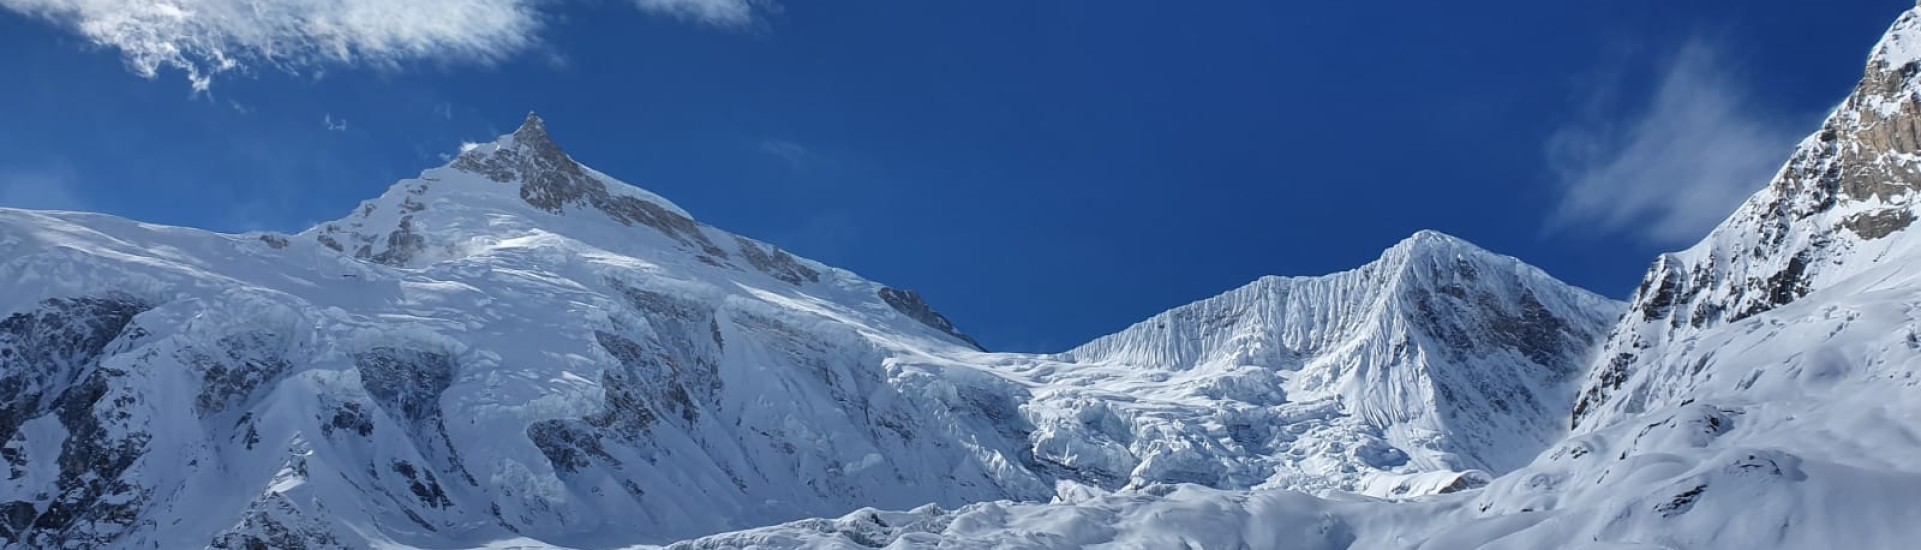 Alex Txikon again on Manaslu after the avalanche that hit the base camp